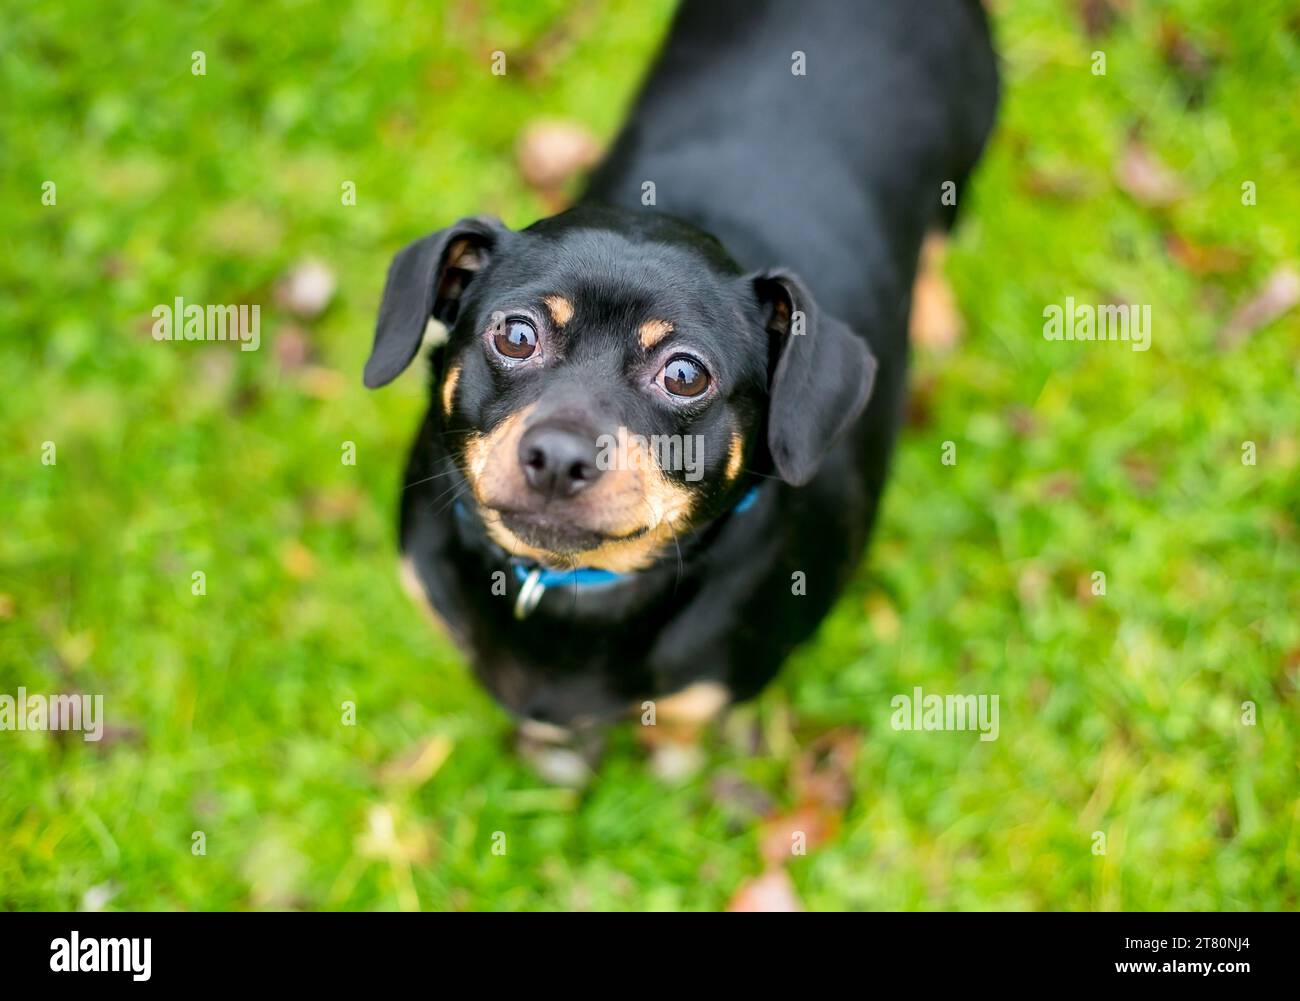 An overweight Chihuahua x Dachshund mixed breed dog looking up at the camera Stock Photo